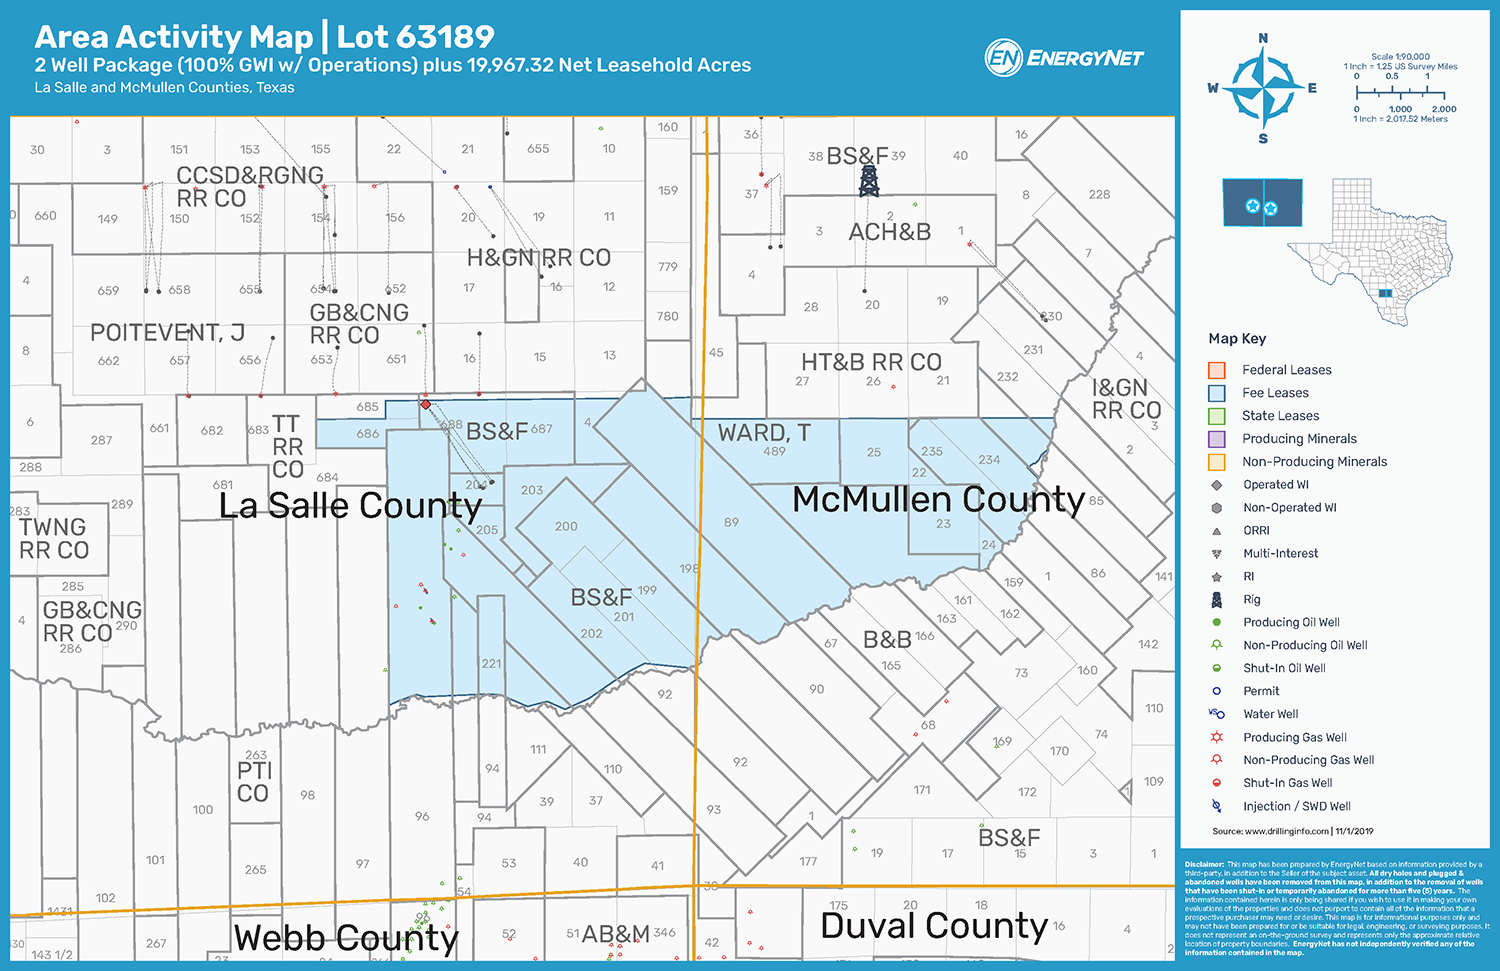 Vitruvian Exploration Eagle Ford Shale Opportunity Asset Map, La Salle and McMullen counties, Texas (Source: EnergyNet)